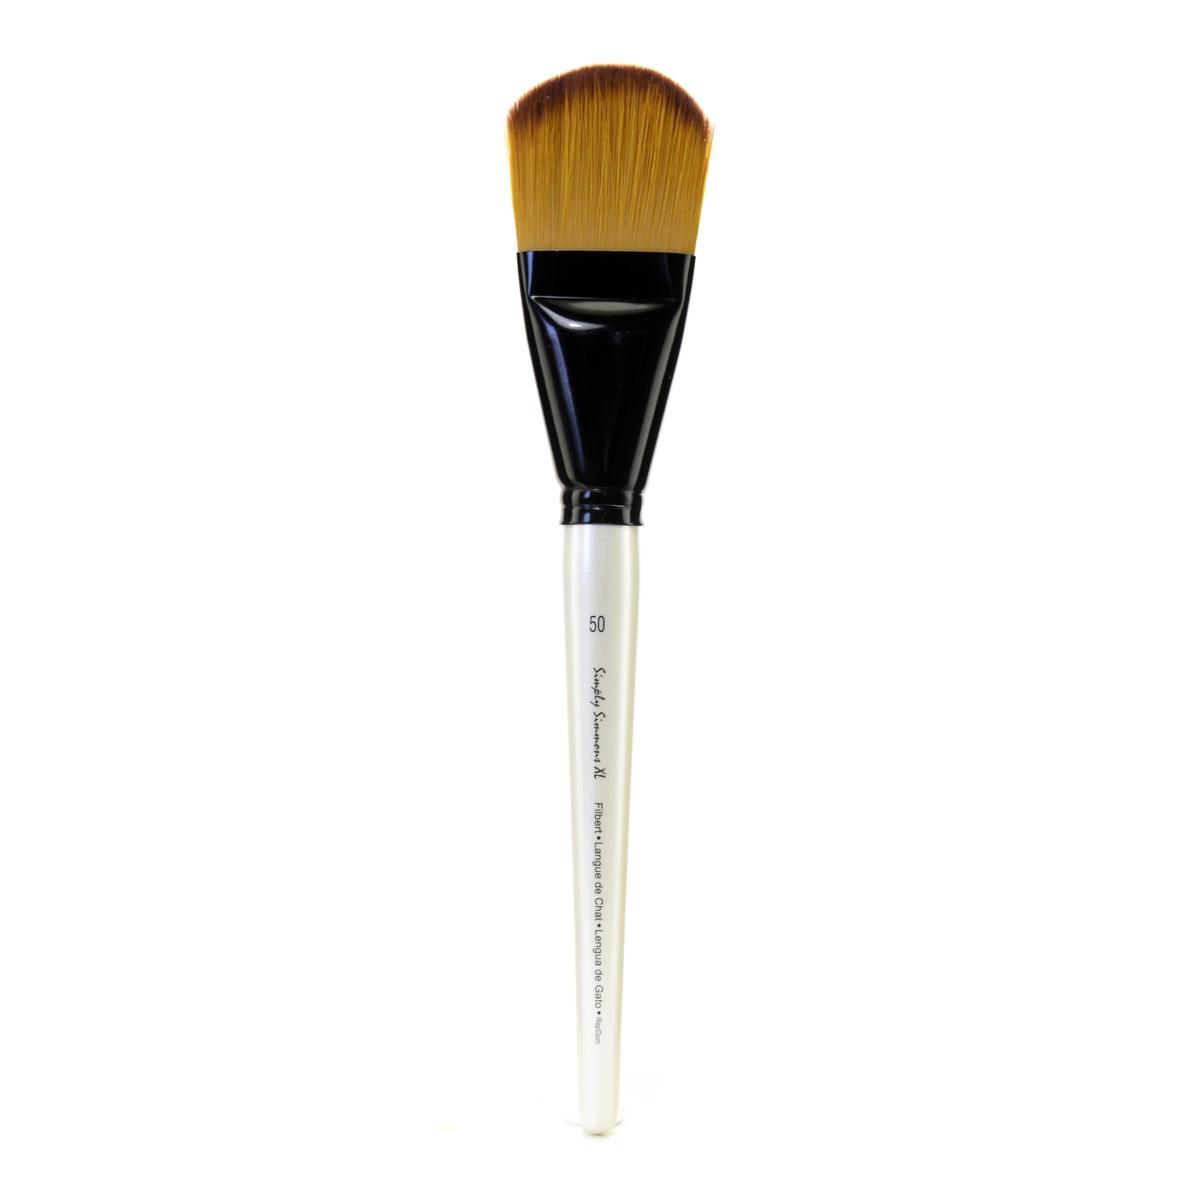 Simply Simmons XL Brushes - Filbert / #50 / Soft Synthetic by Robert Simmons - K. A. Artist Shop